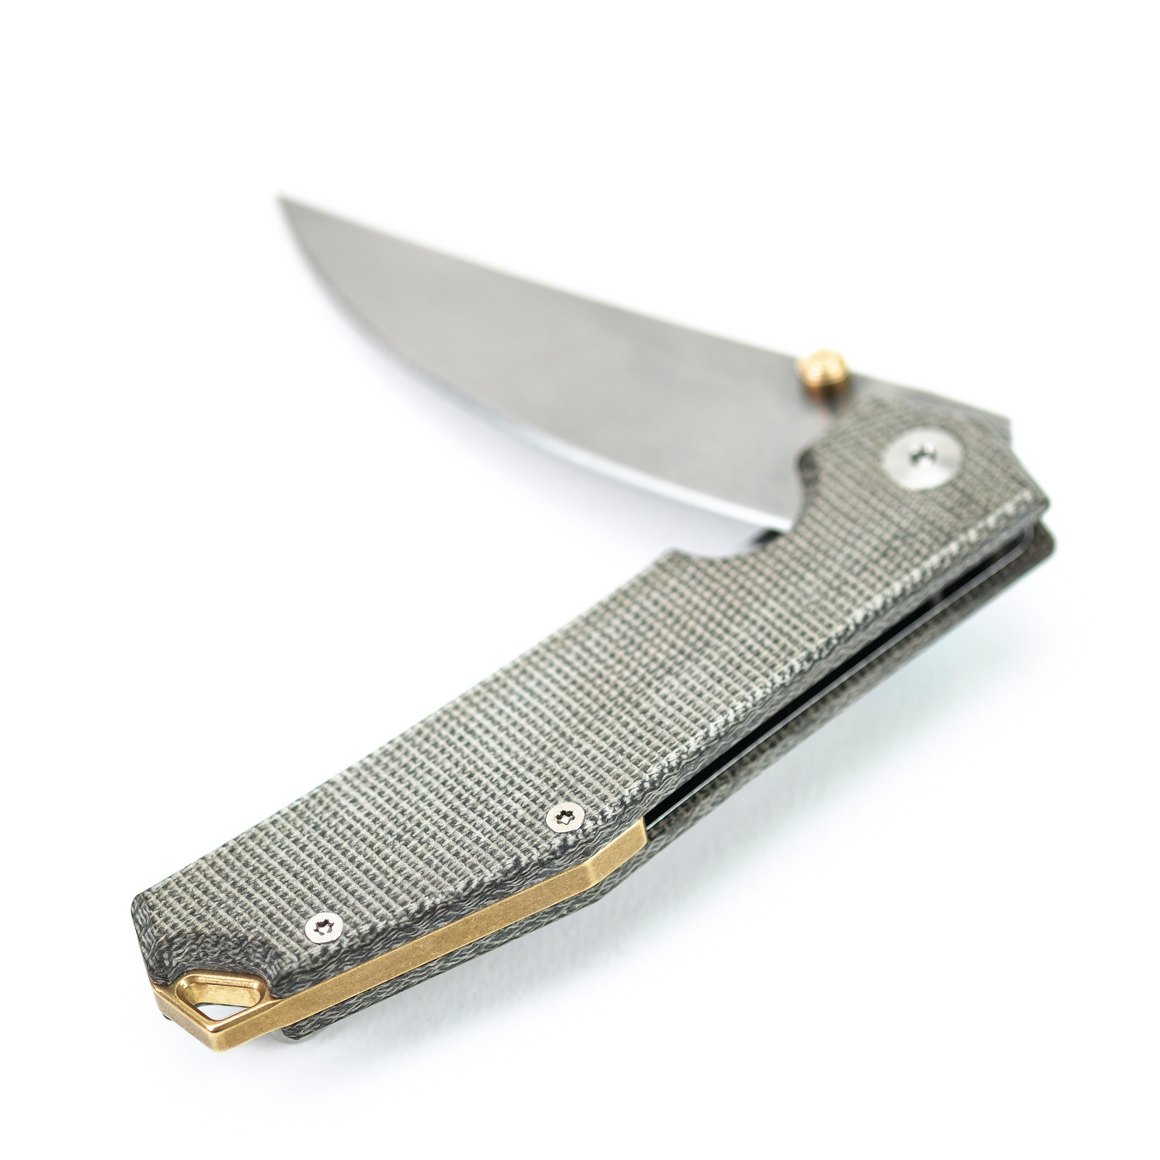 ACE Clyde - Green Canvas and Brass - Elmax Blade Steel, Stonewash finish - Green canvas micarta Handle - close up